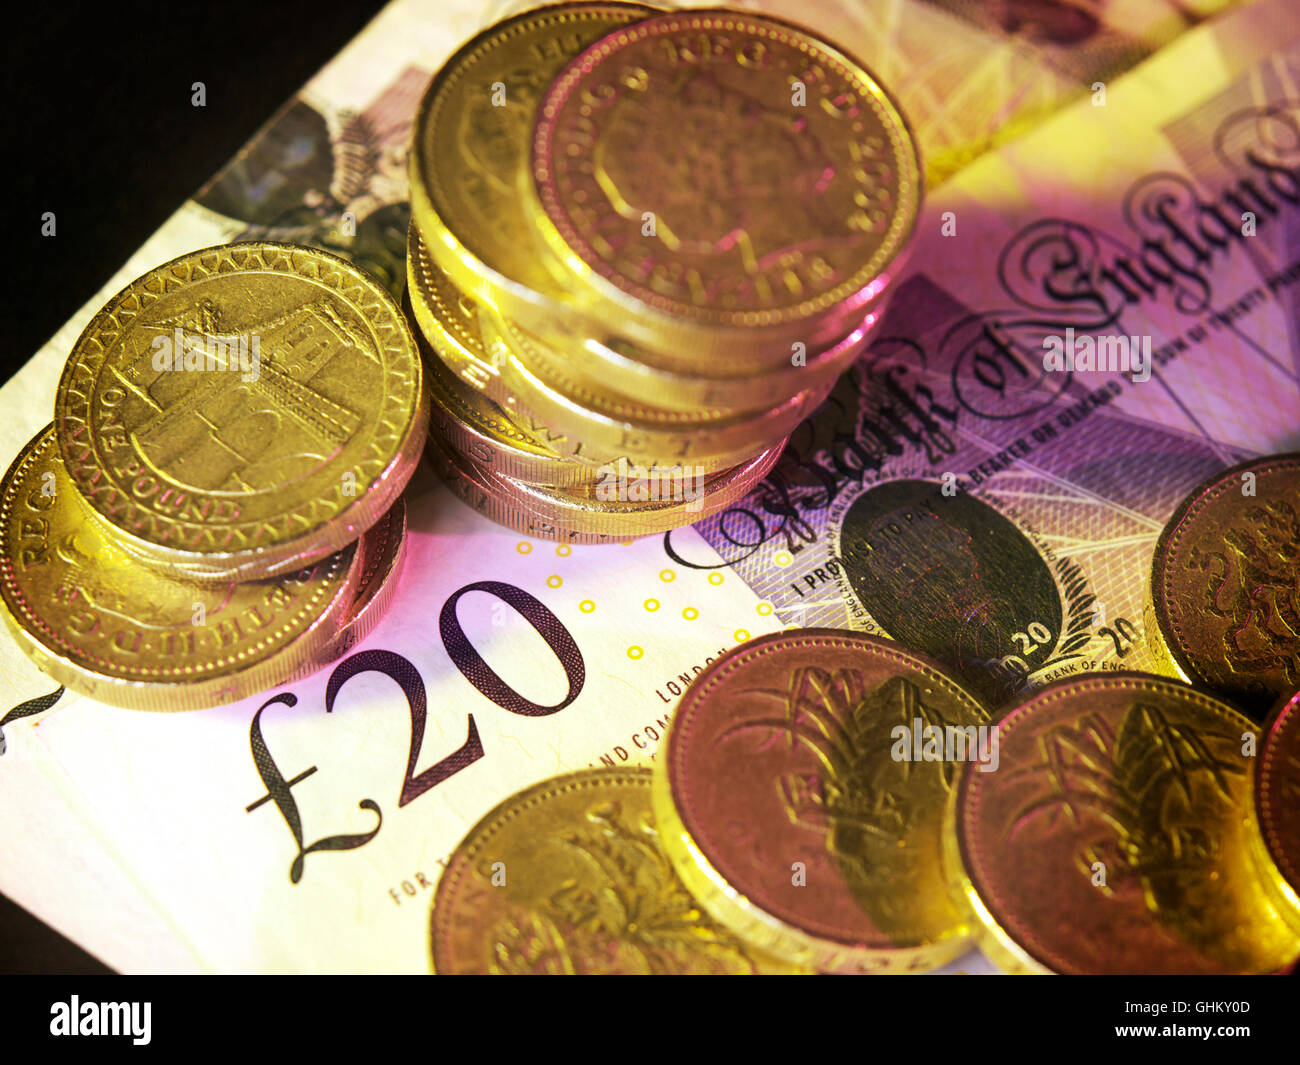 UK currency, pound coins laying on a twenty pound note Stock Photo